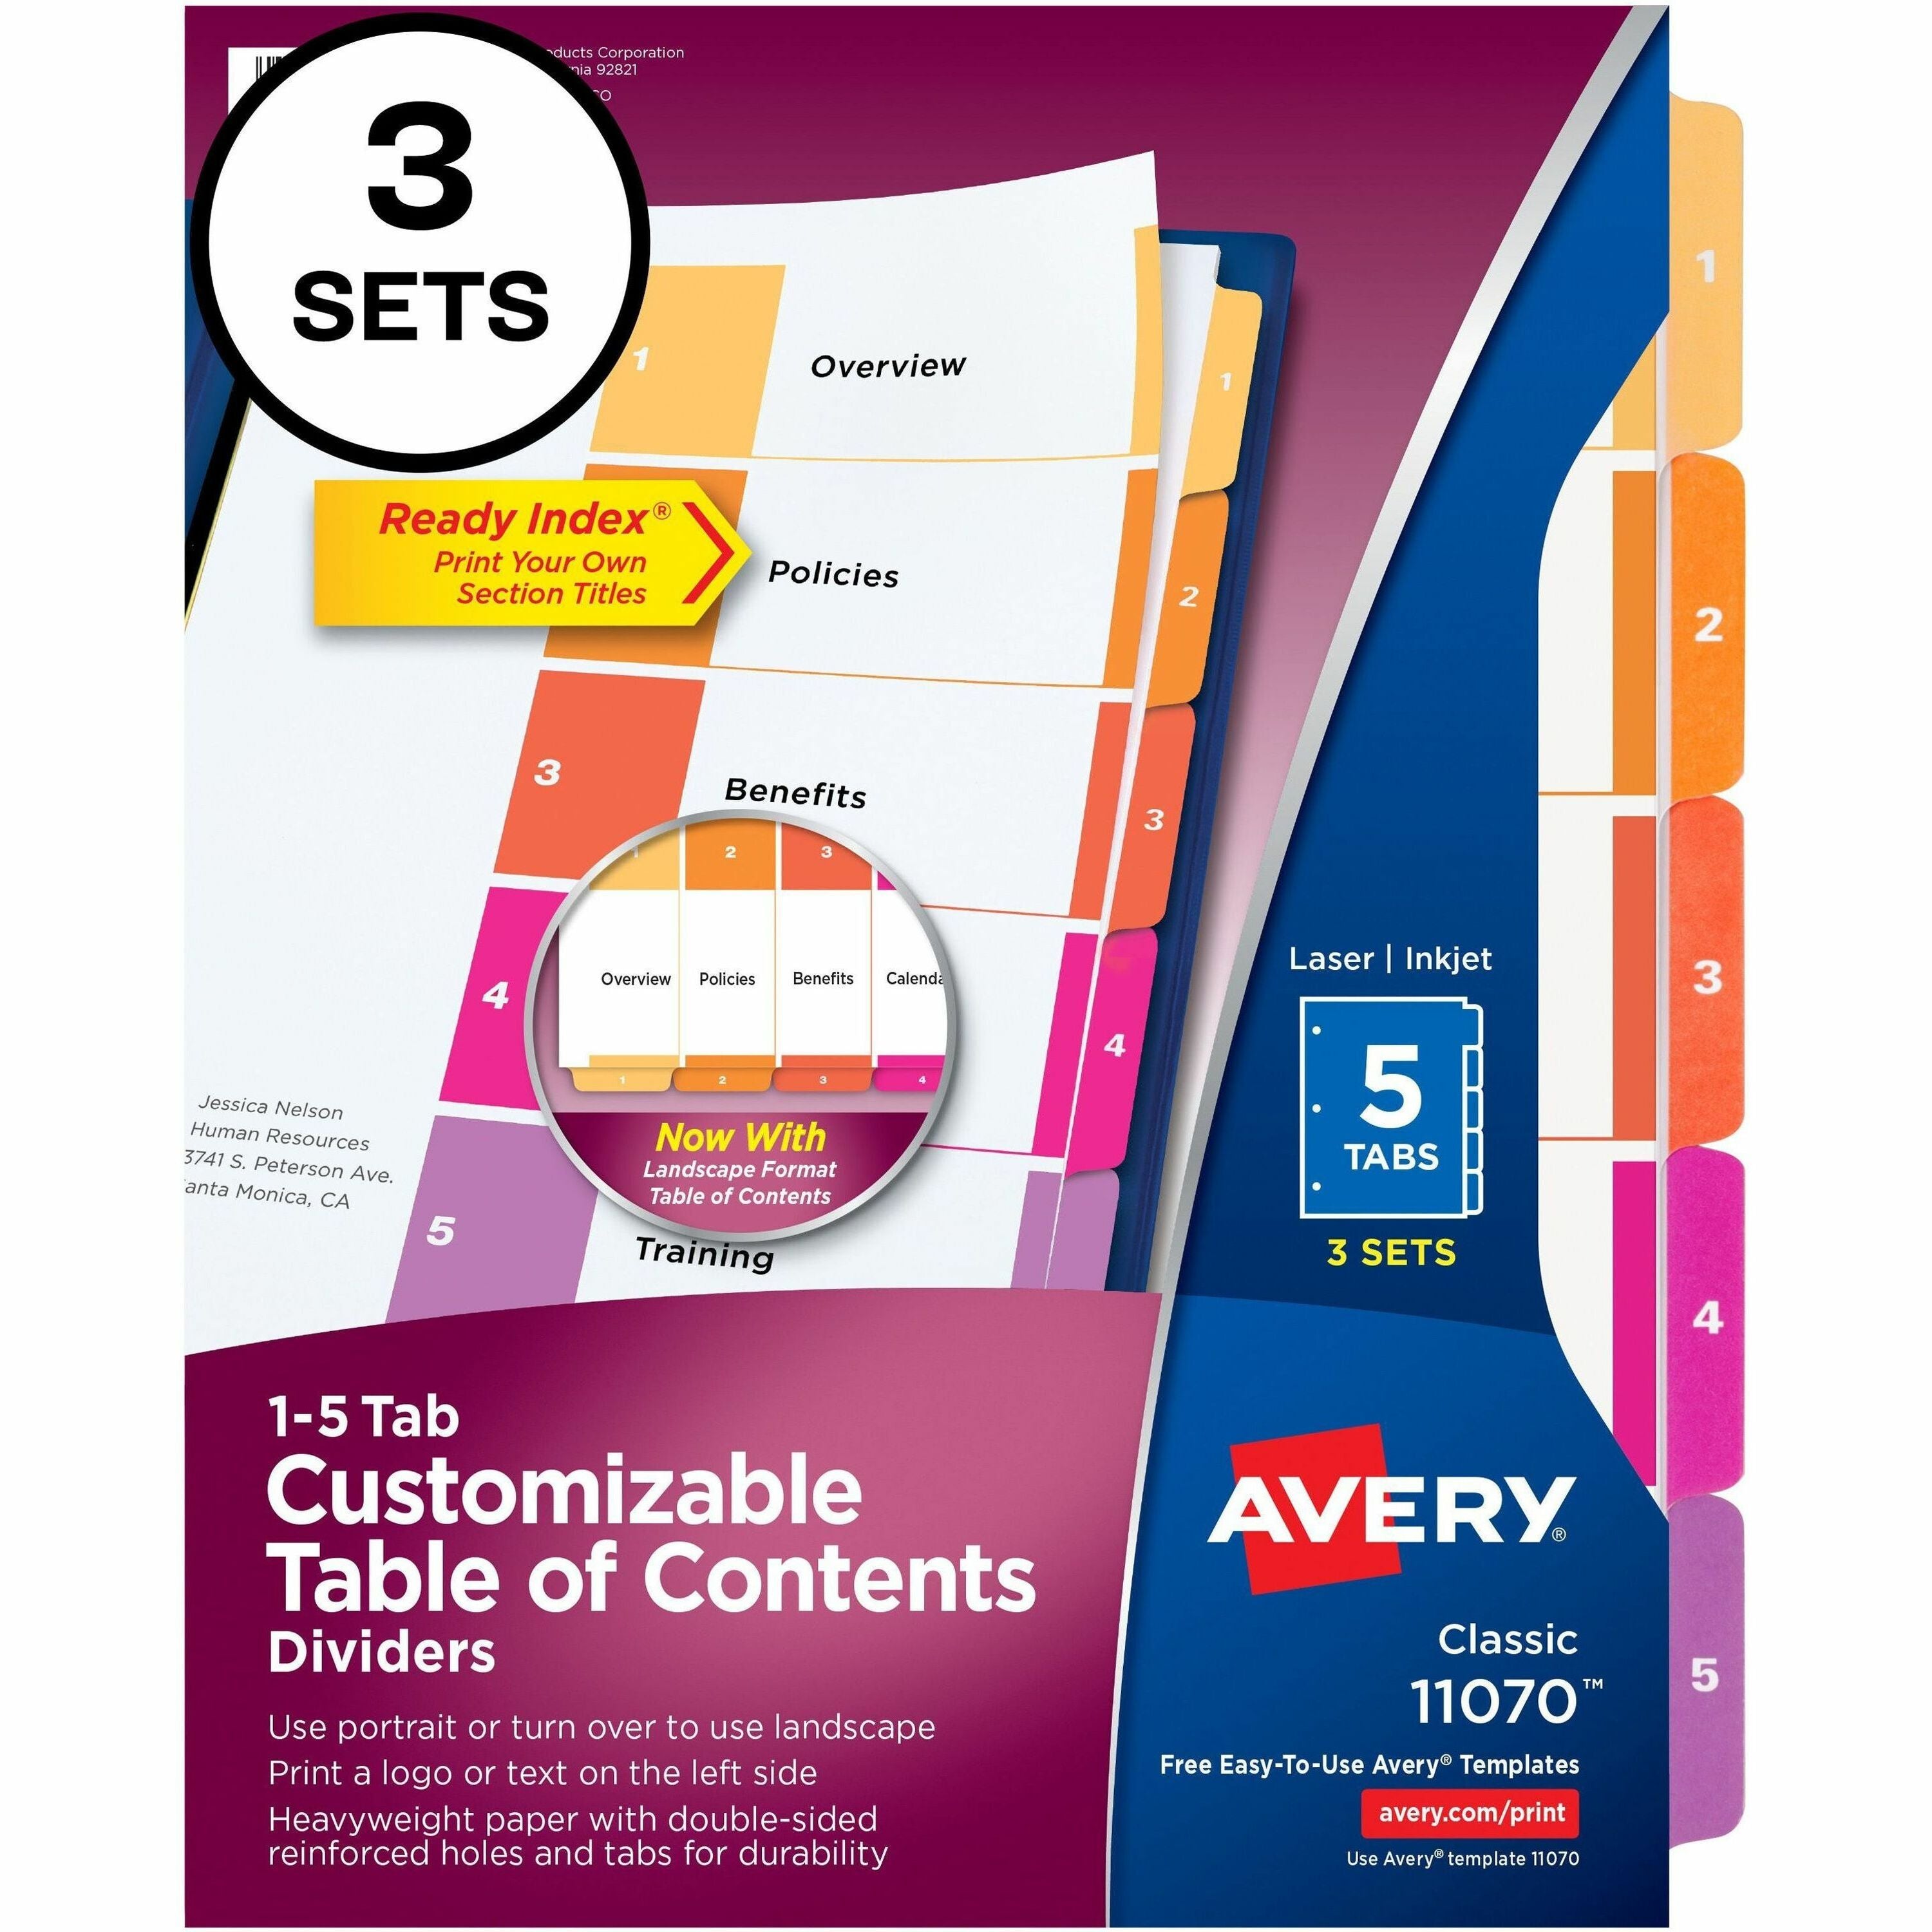 avery-customizable-table-of-contents-dividers-ready-indexr-printable-section-titles-preprinted-1-5-multicolor-tabs-3-sets-11070_ave11070 - 1